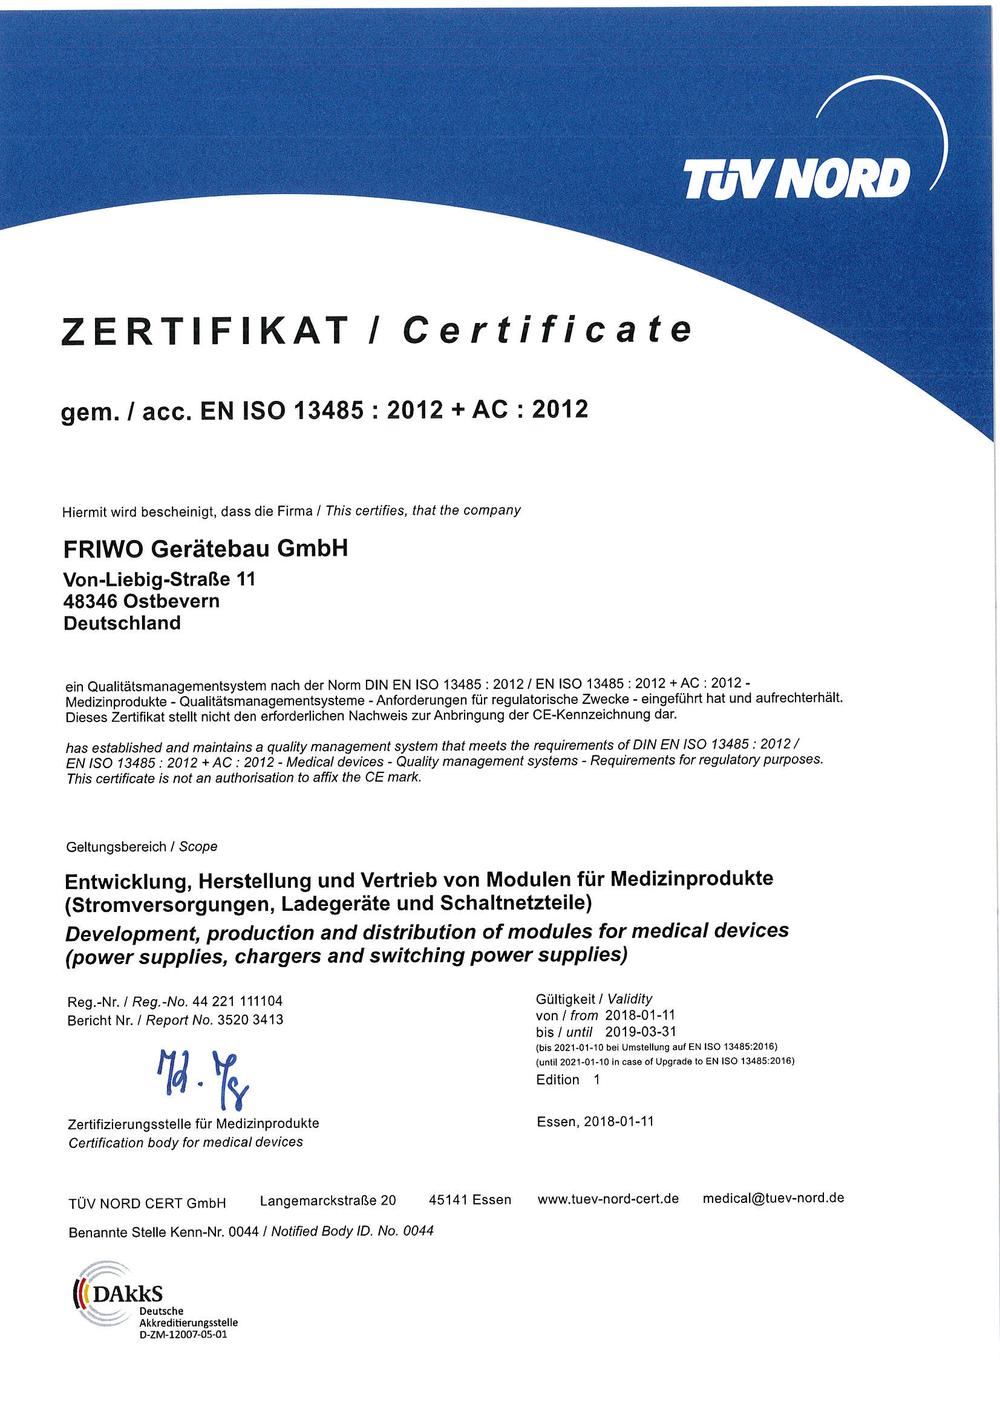 FRIWO power supplies already complying with DIN EN ISO 13485 Certification